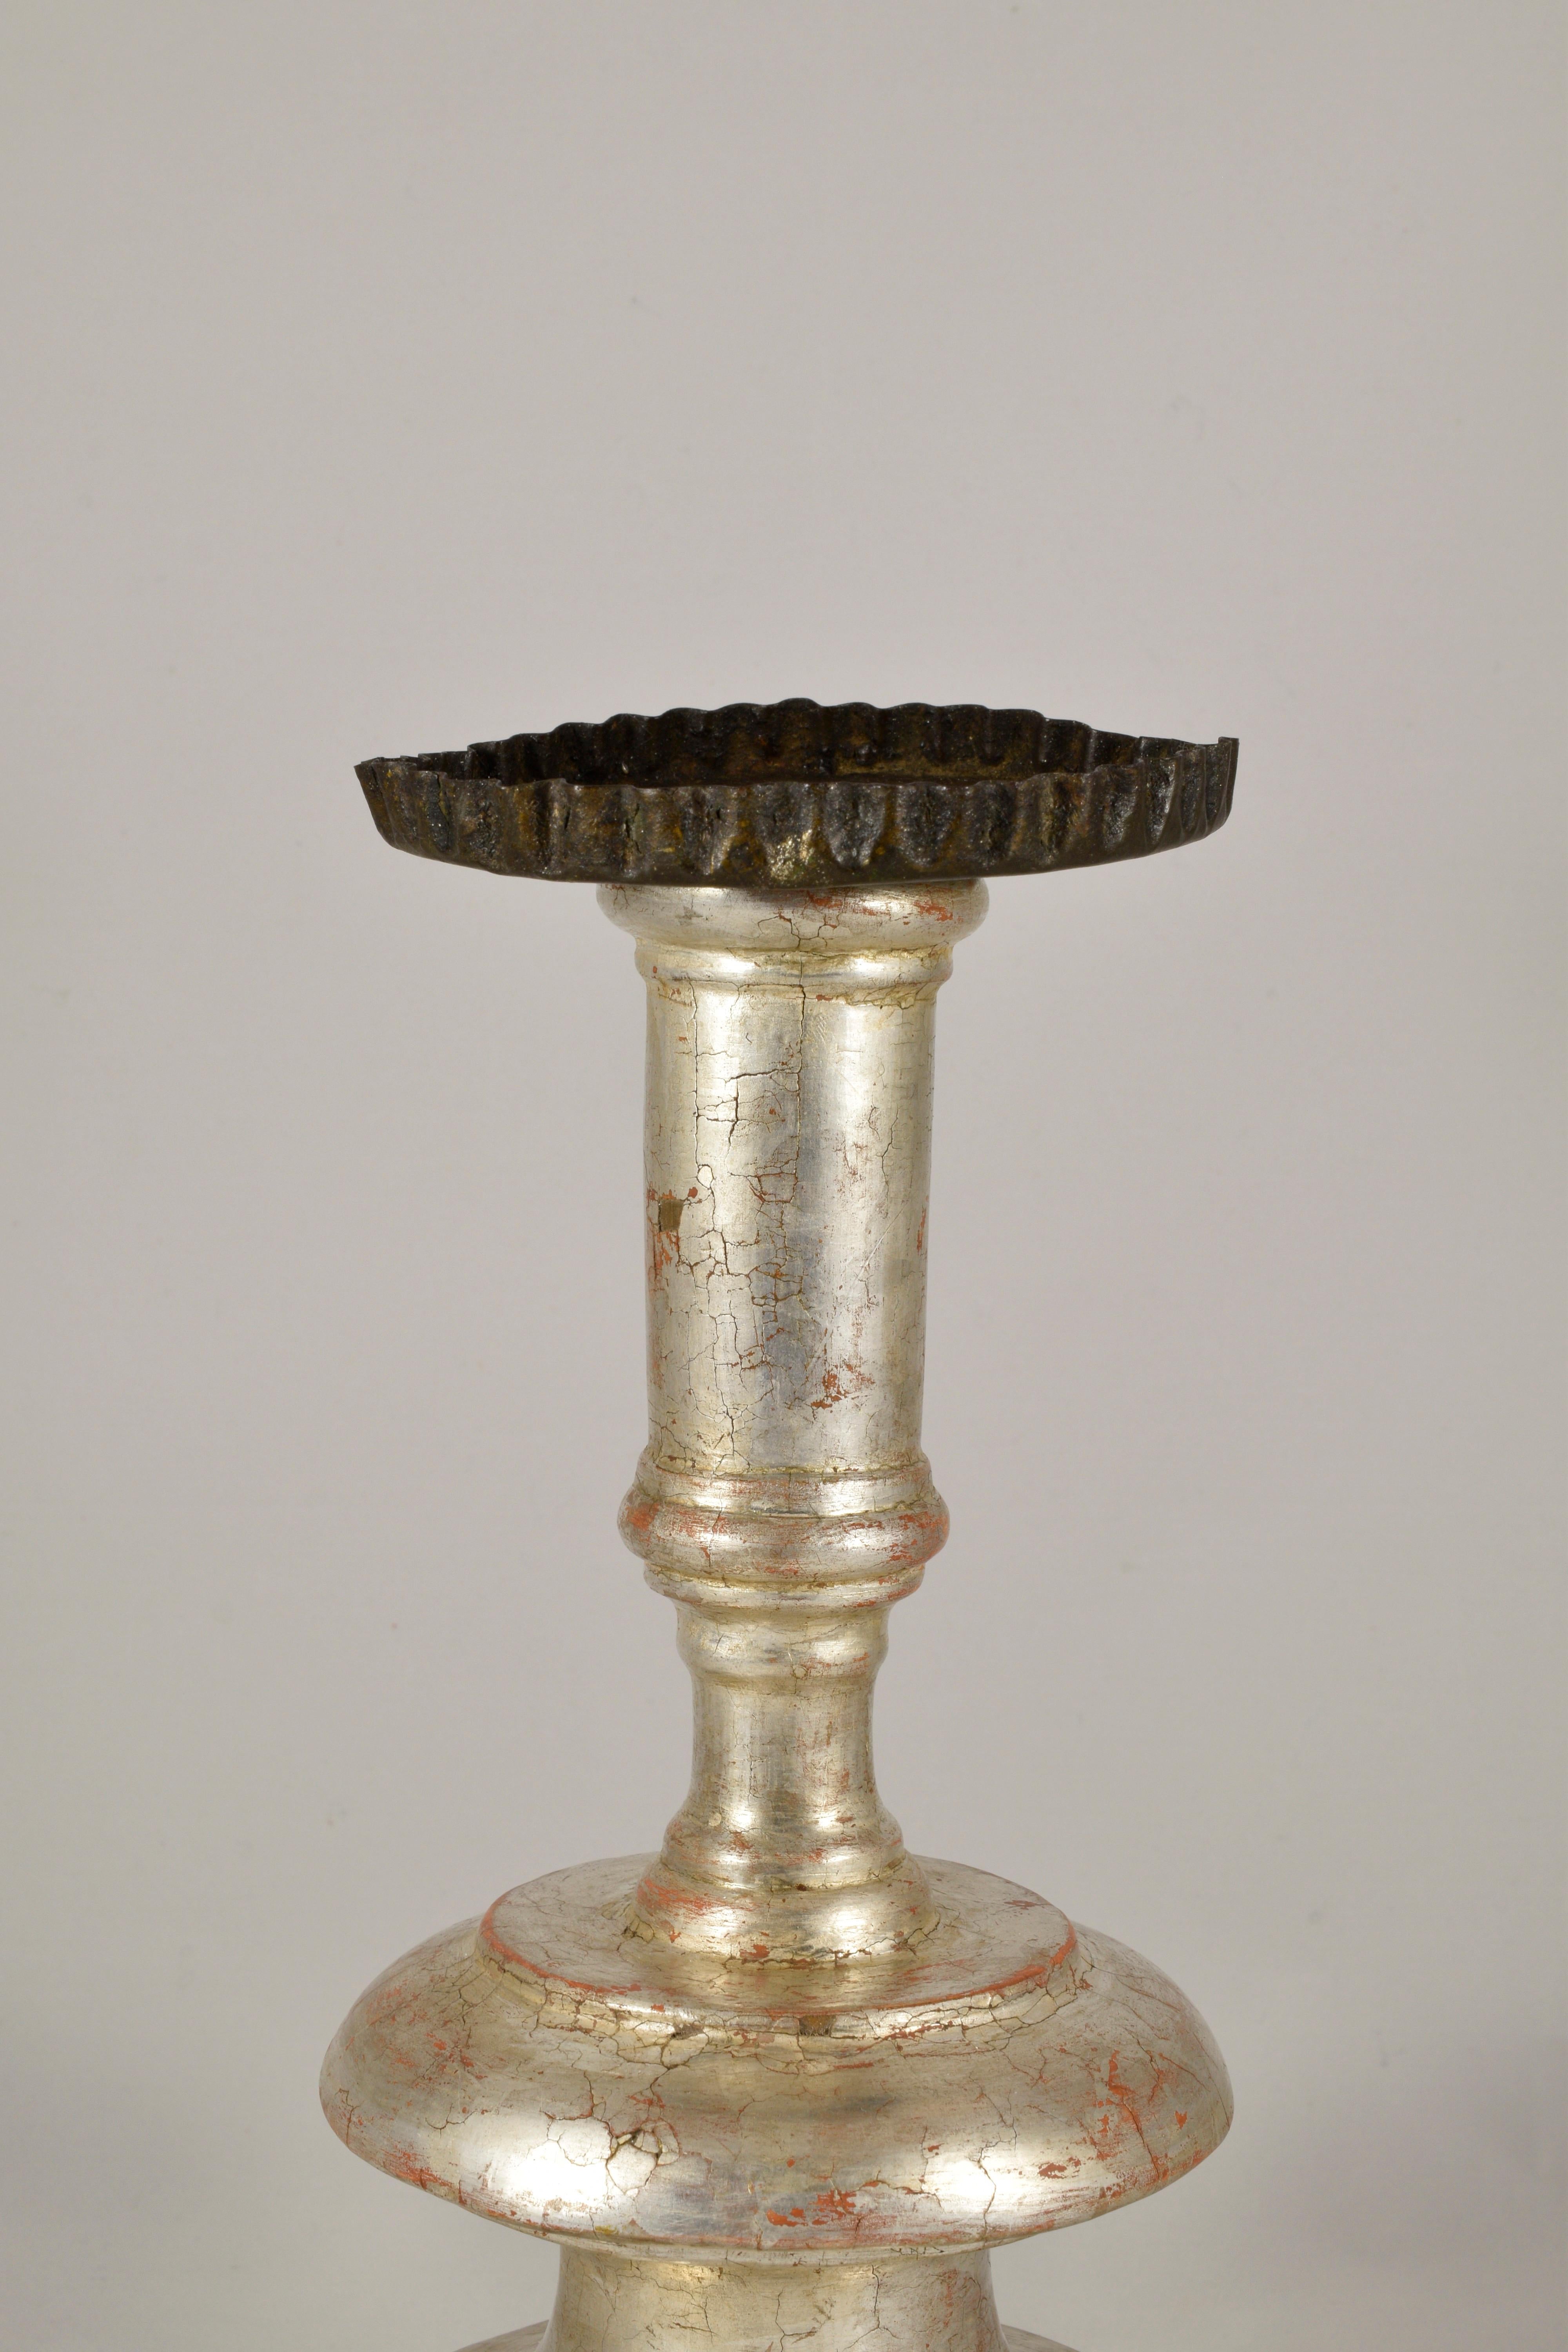 Florentine Candlestick in Lathed and Silvered Wood, Late 17th Century For Sale 2